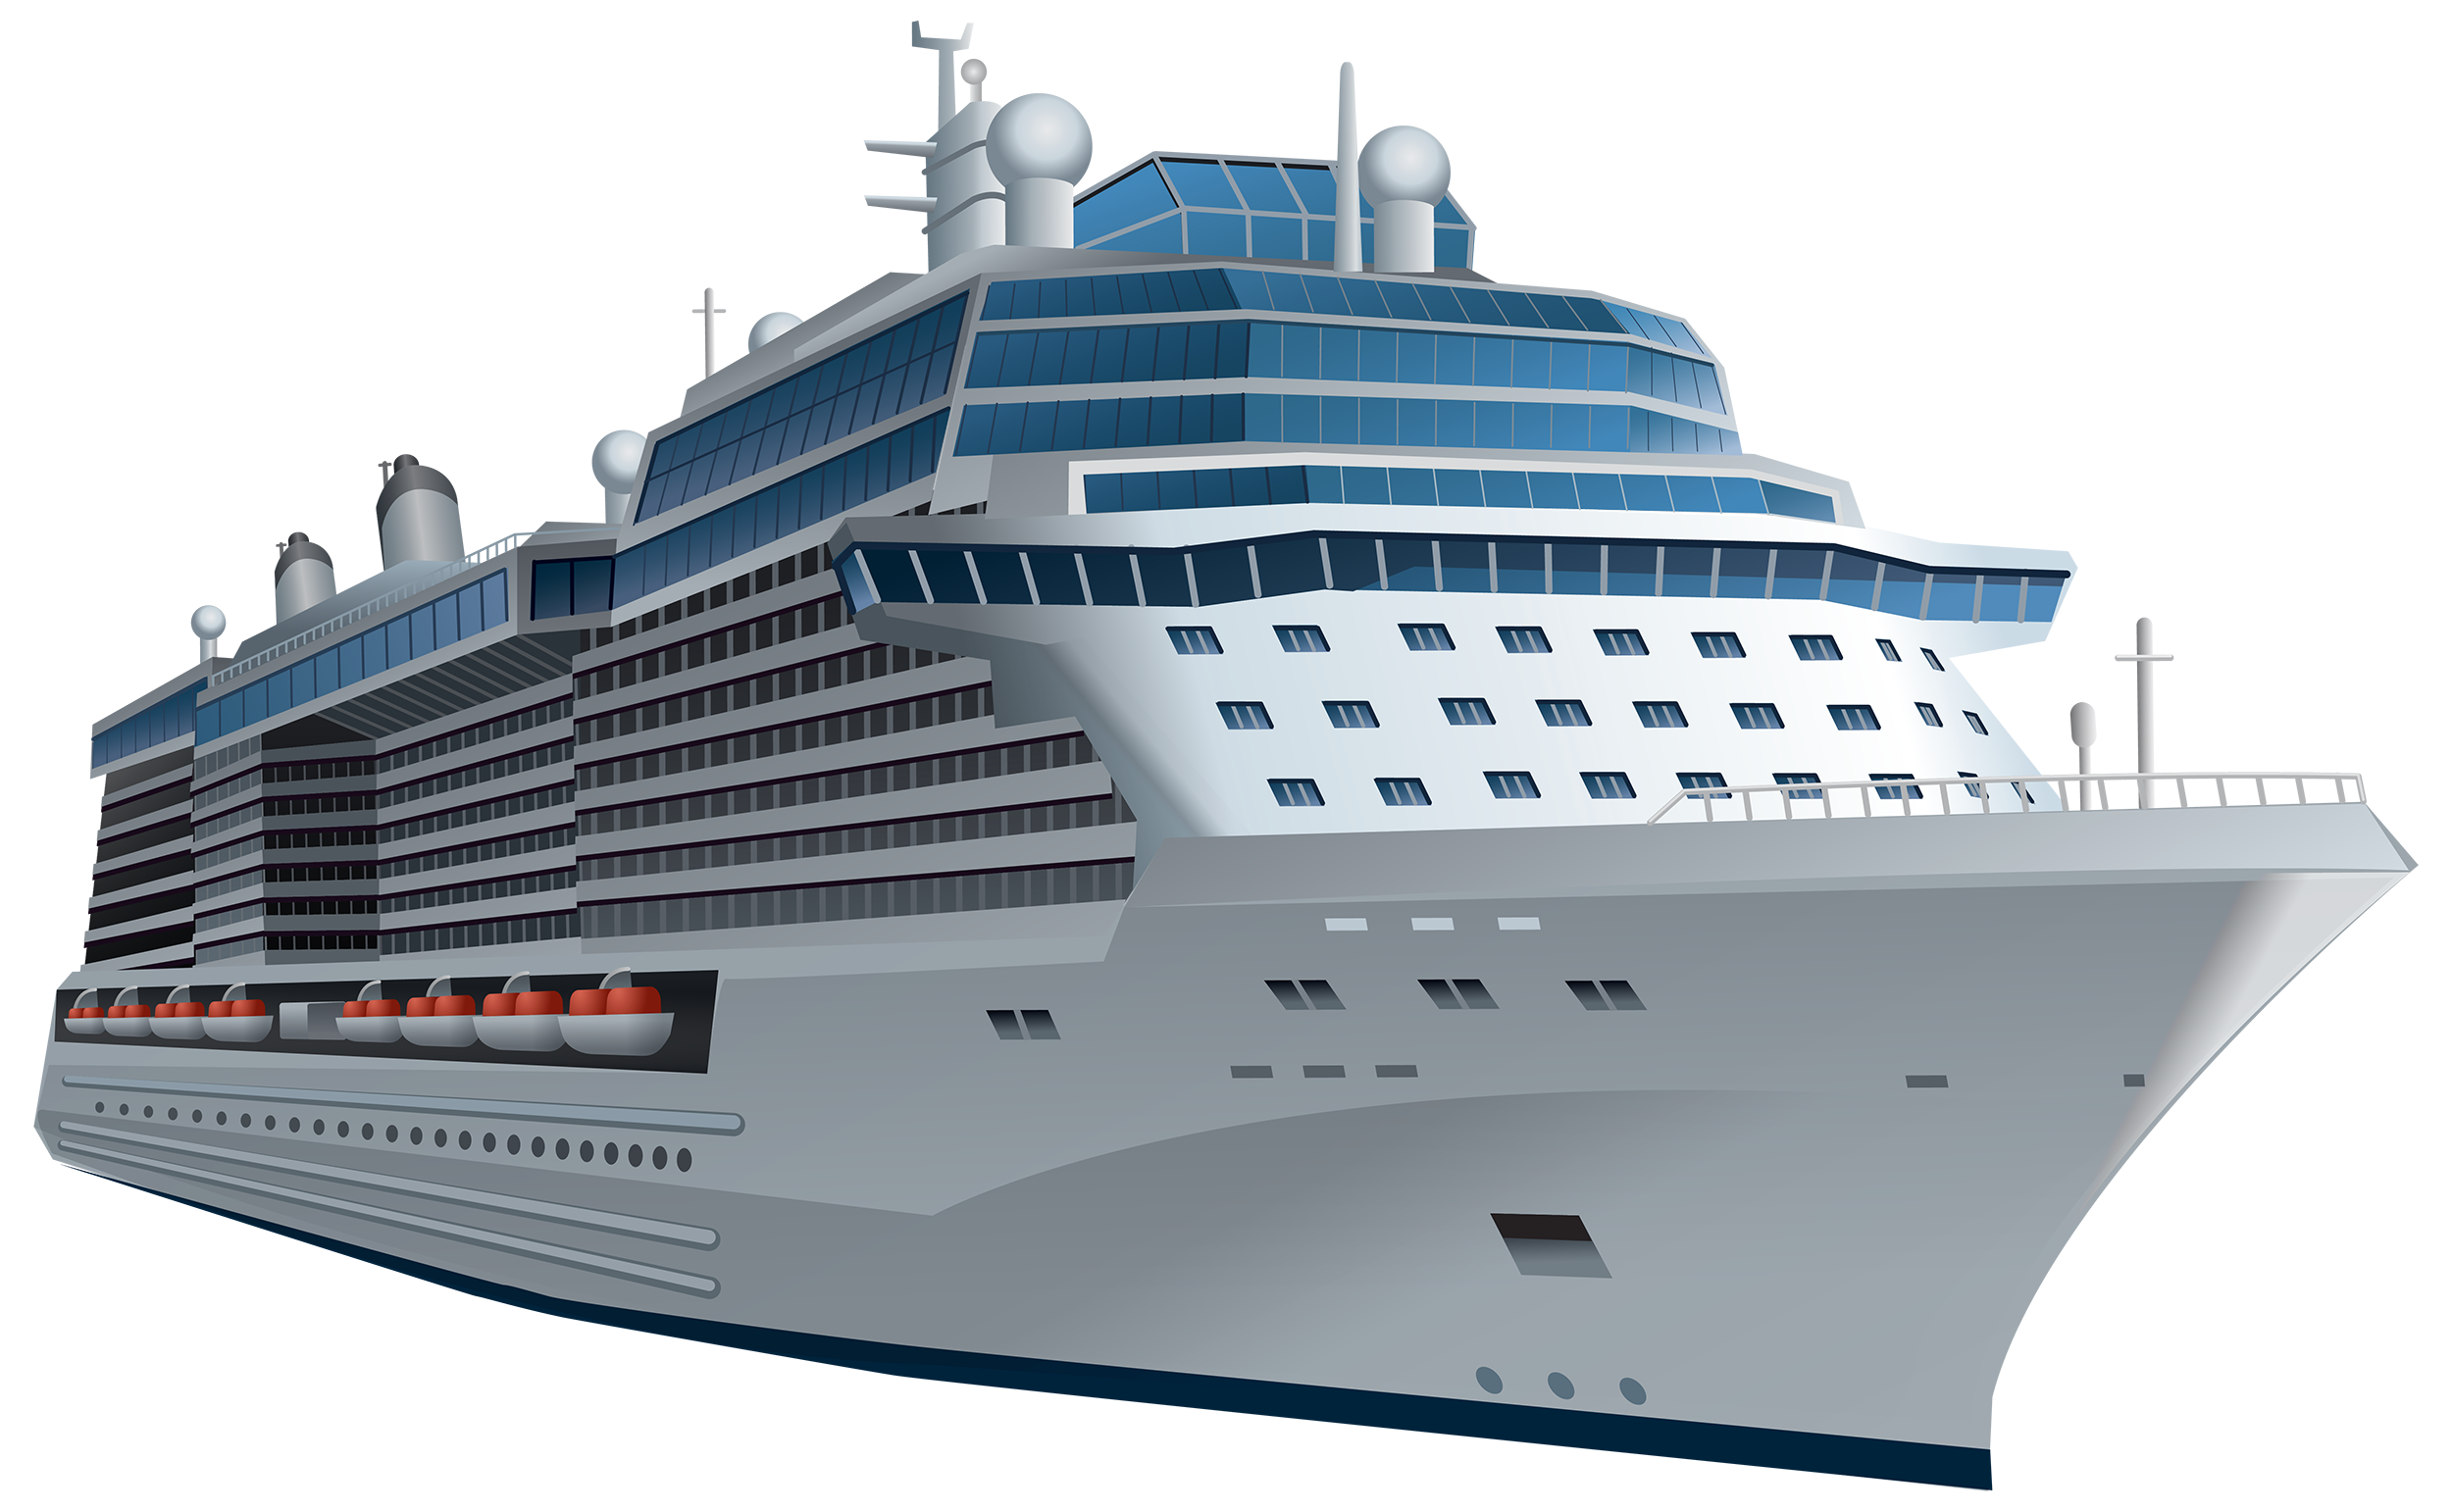 clipart picture of cruise ship - photo #12